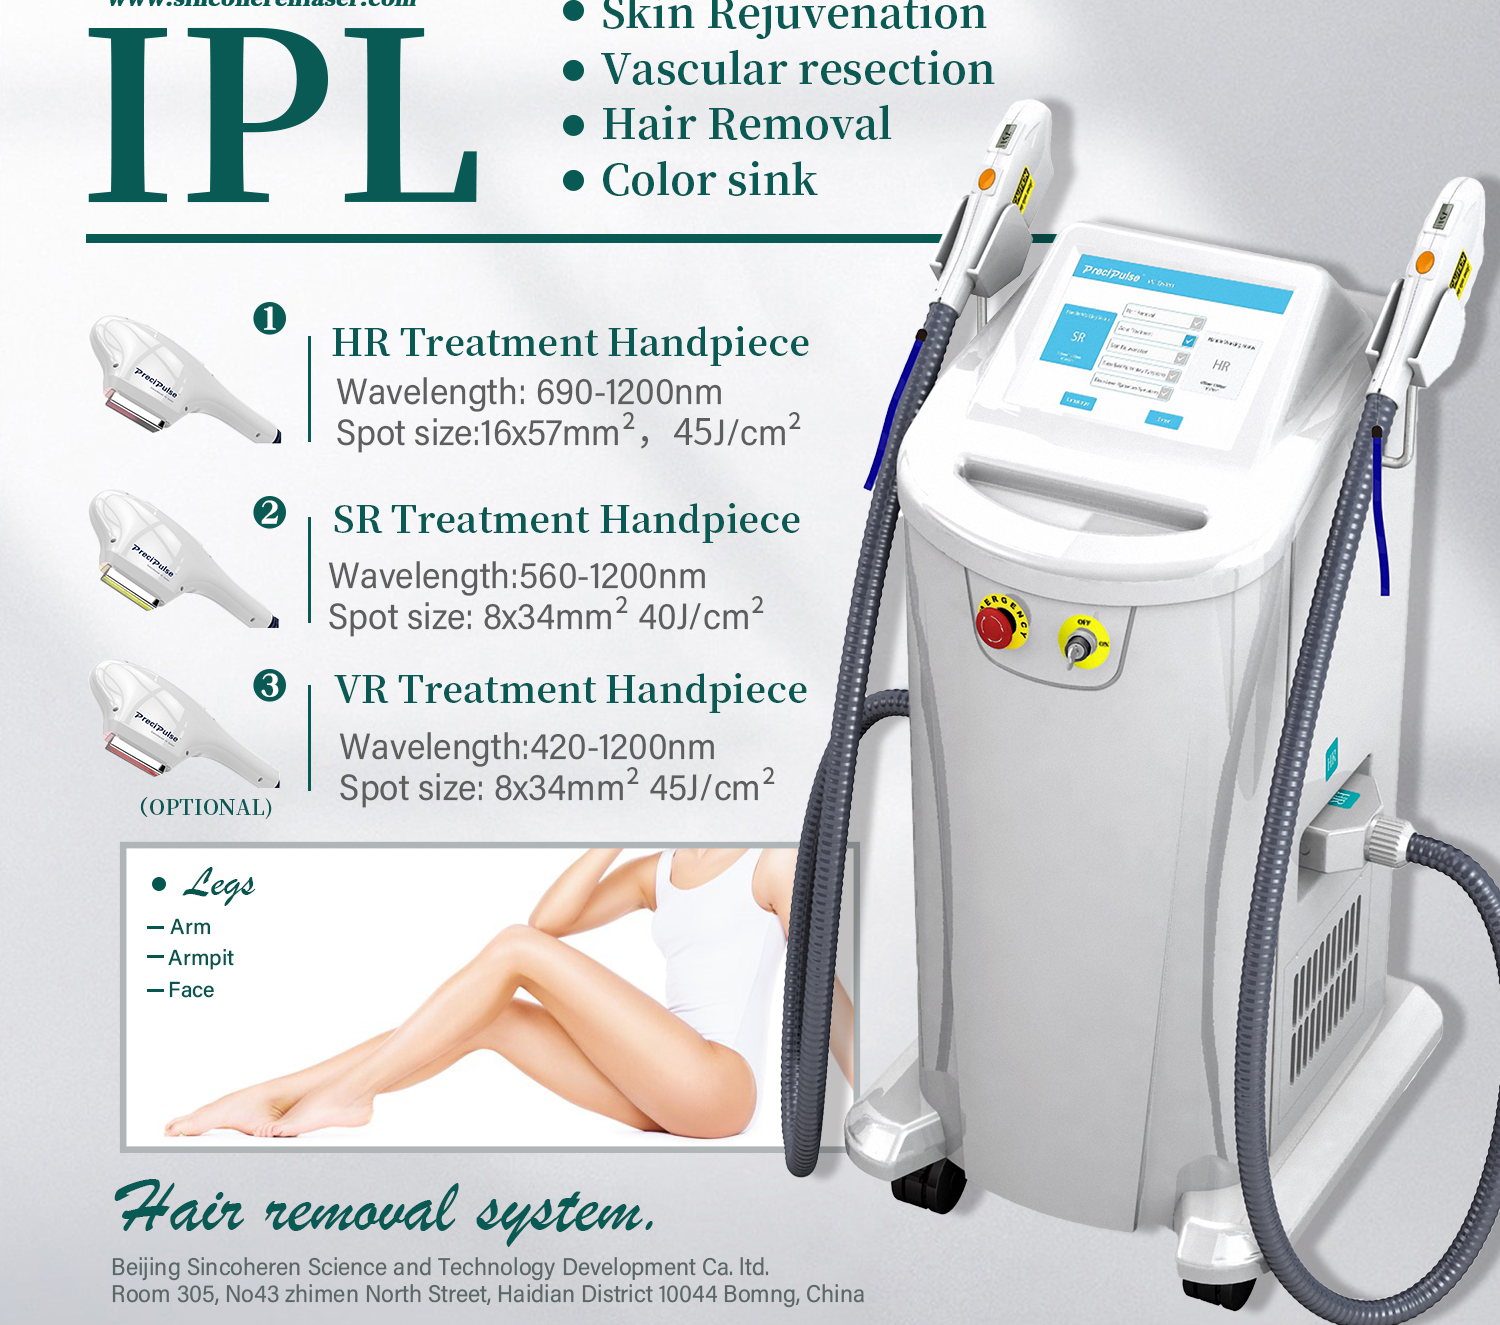 Dual Action: IPL Hair Removal and Skin Rejuvenation